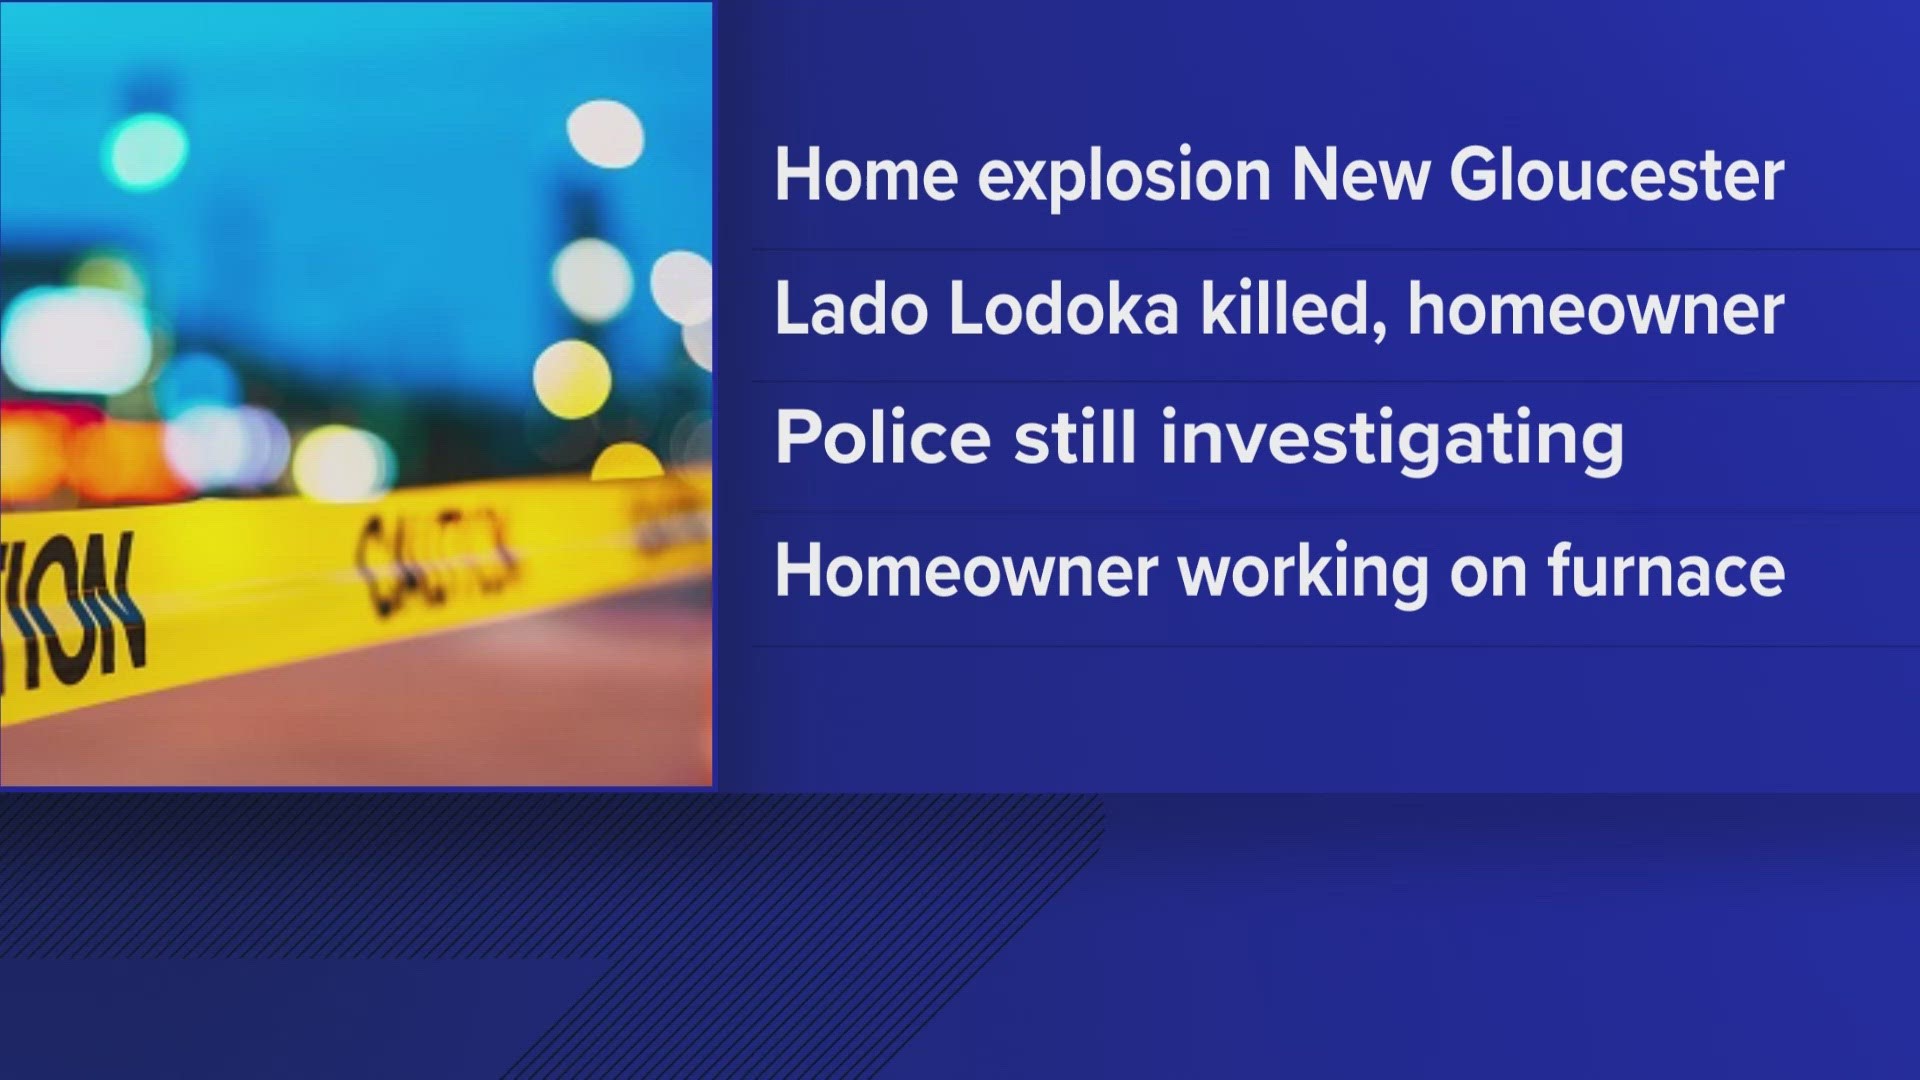 Police said the explosion happened while work was being done on the home's furnace, killing homeowner Lado Lodoka.